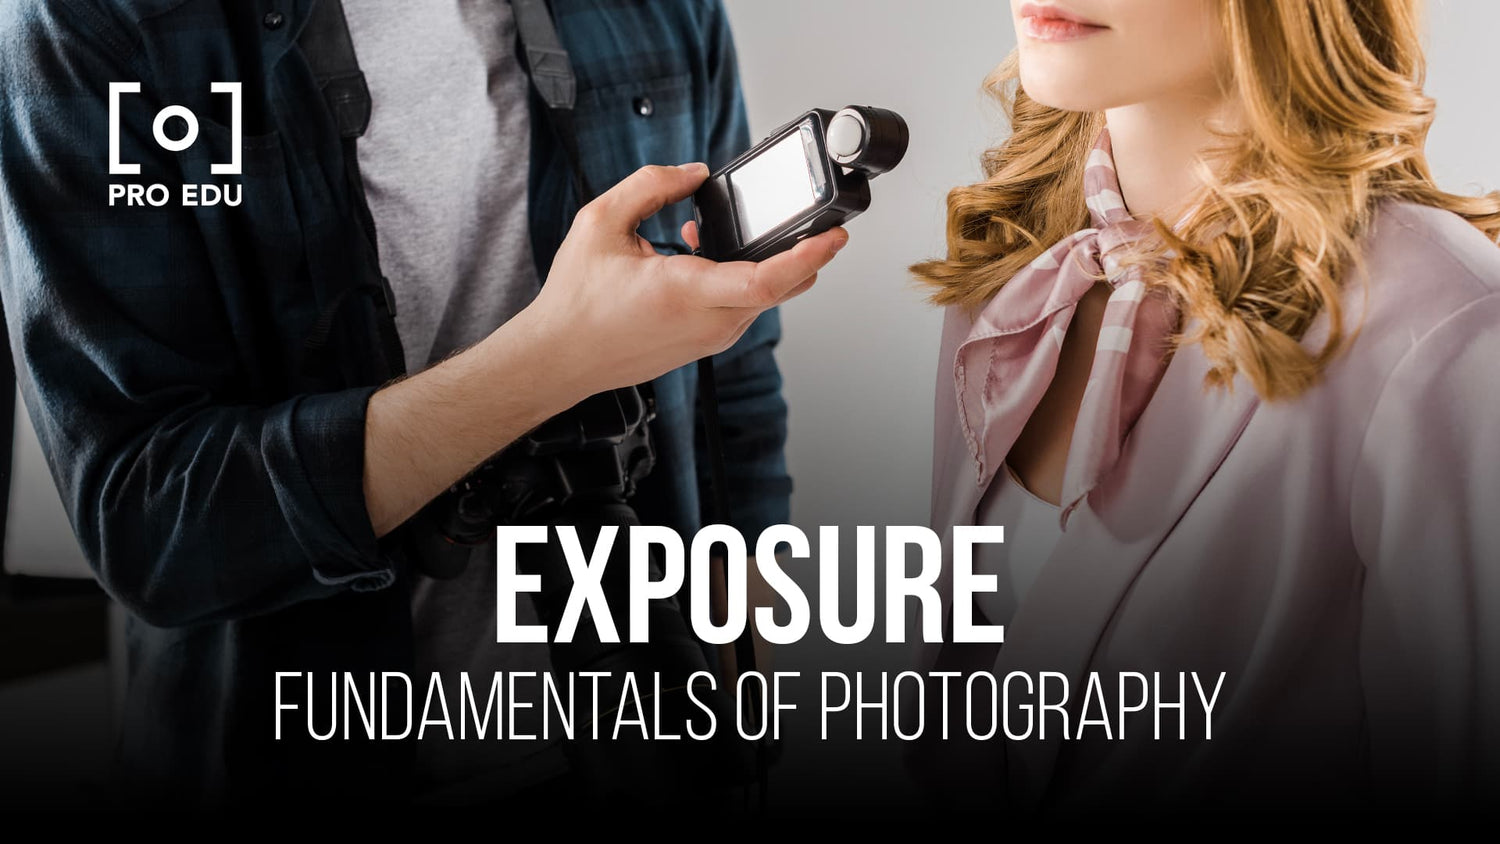 Basics of exposure for beginners in photography, understanding the fundamentals